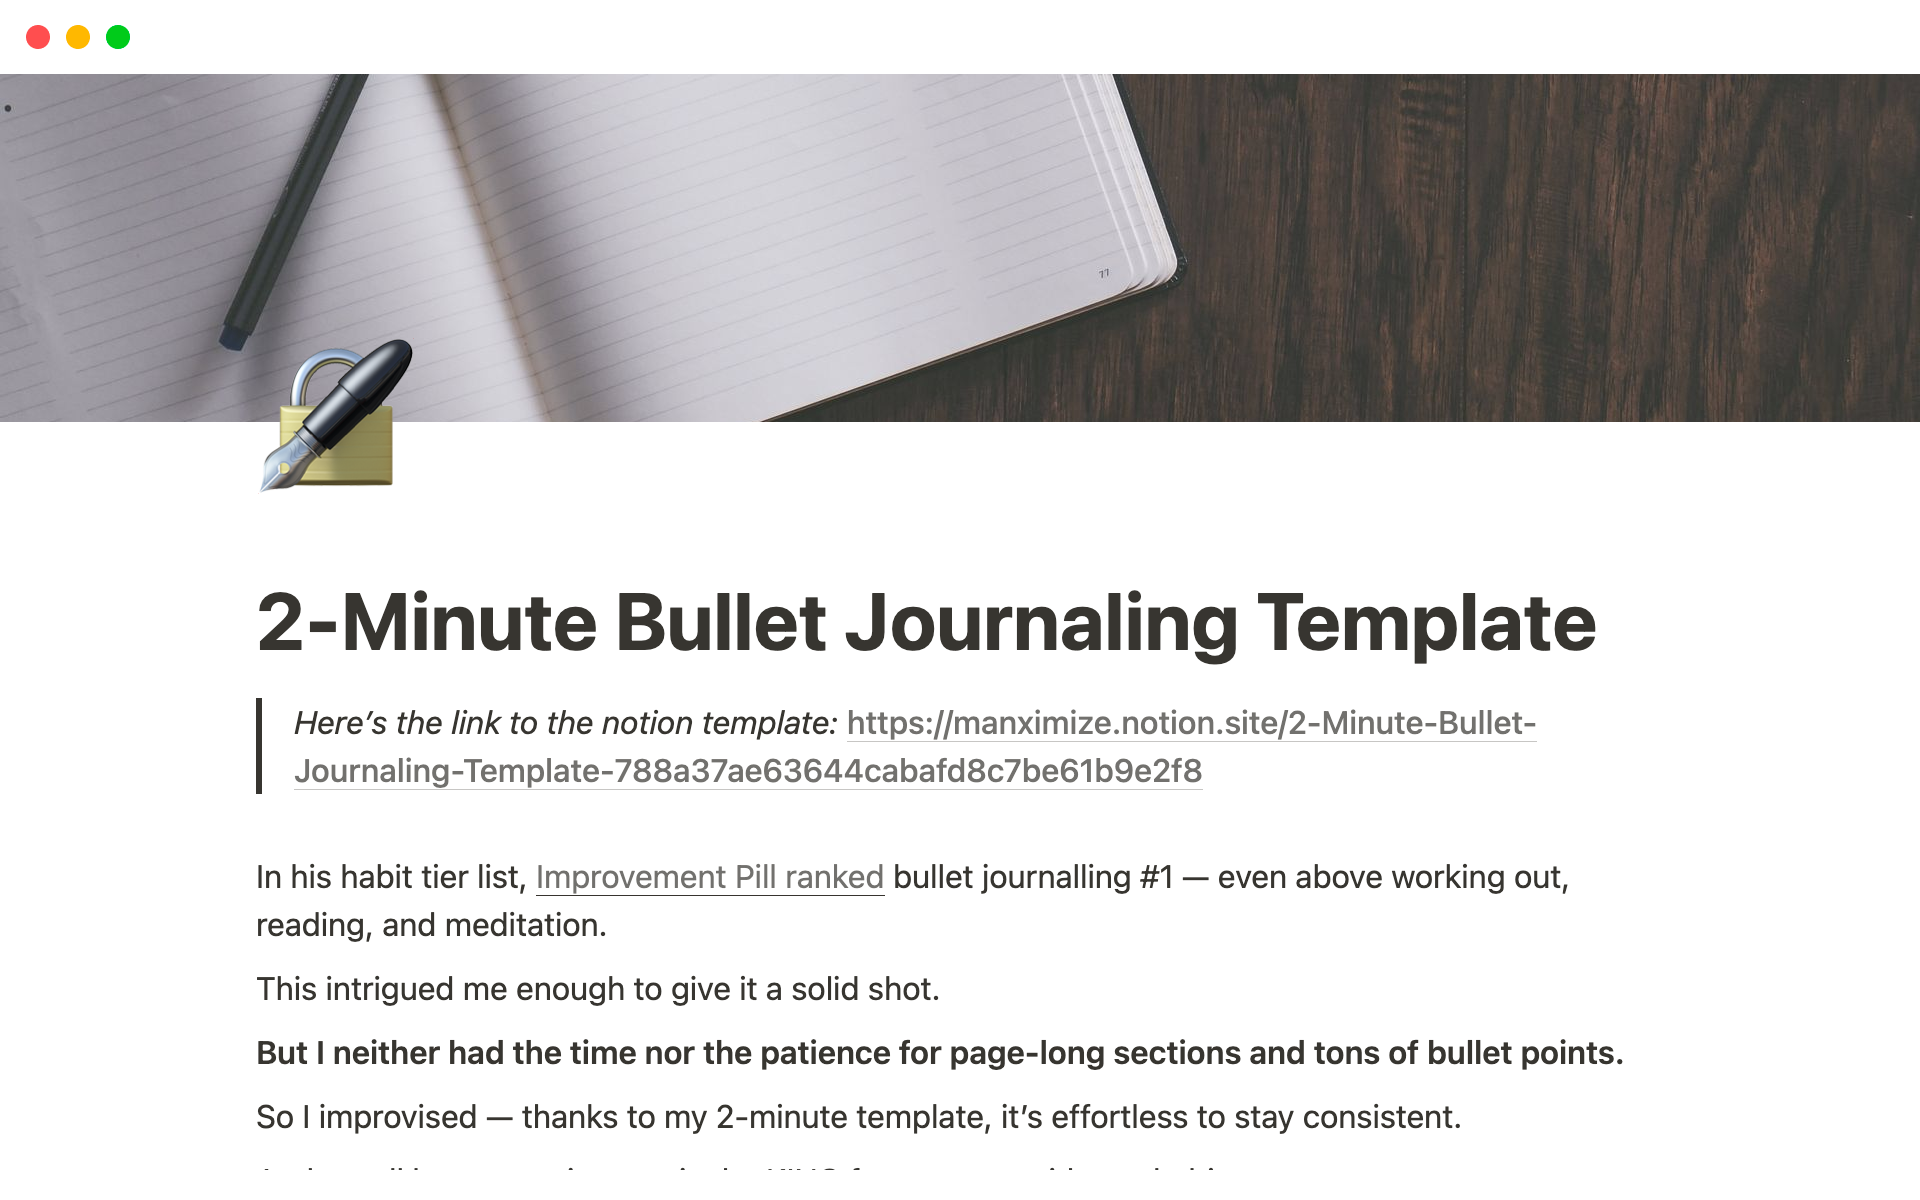 A template preview for 2-Minute Bullet Journaling Template